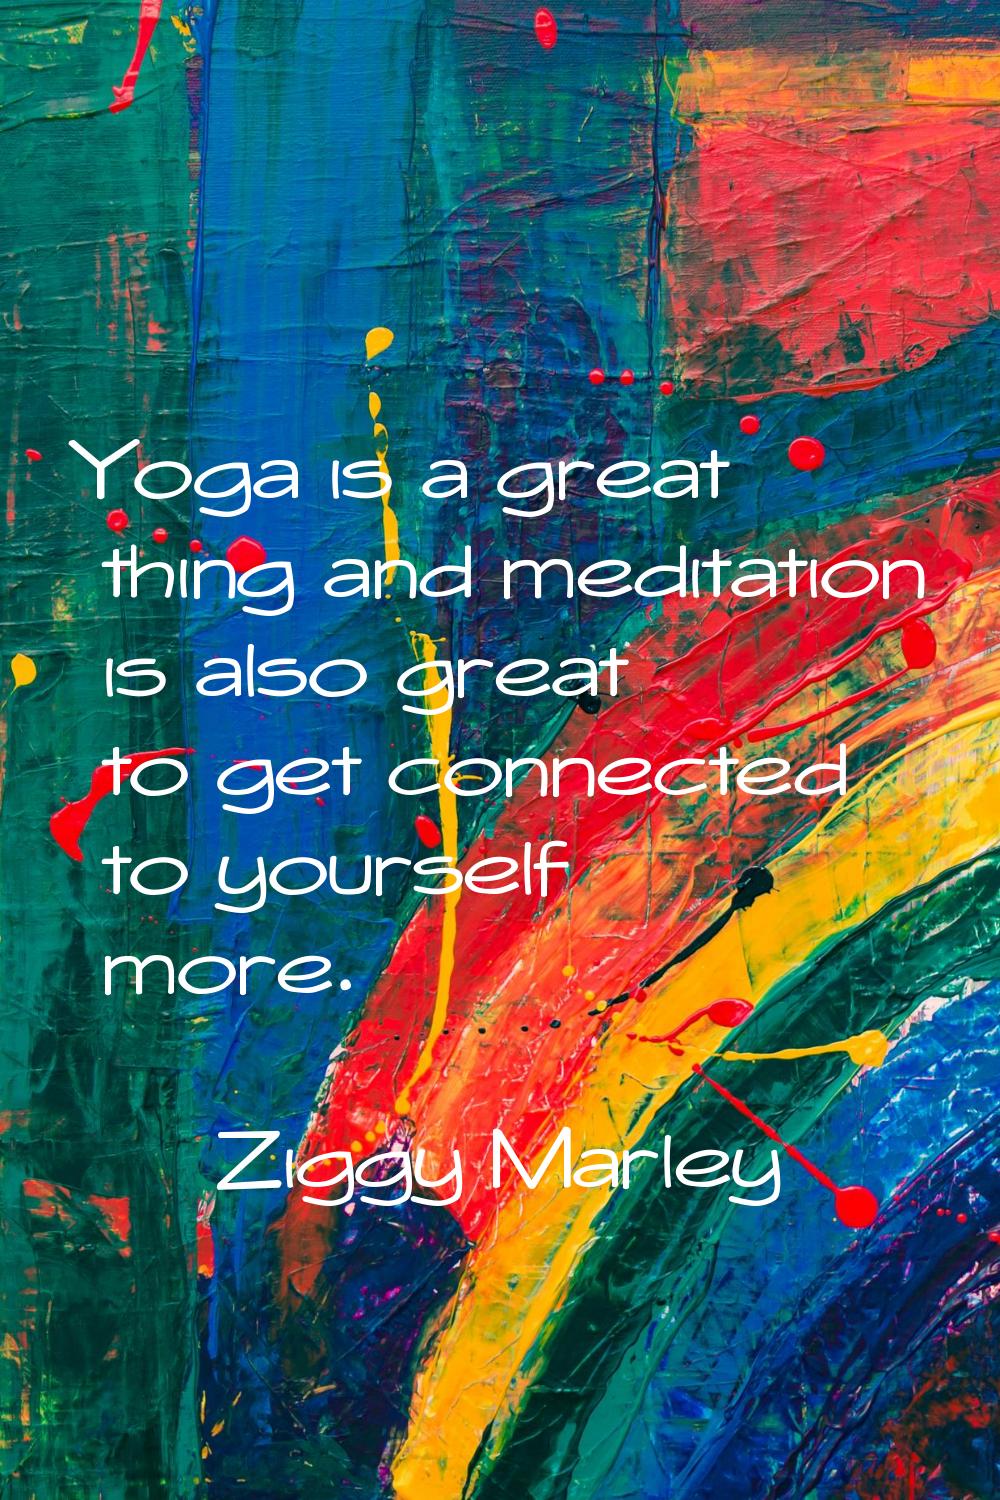 Yoga is a great thing and meditation is also great to get connected to yourself more.